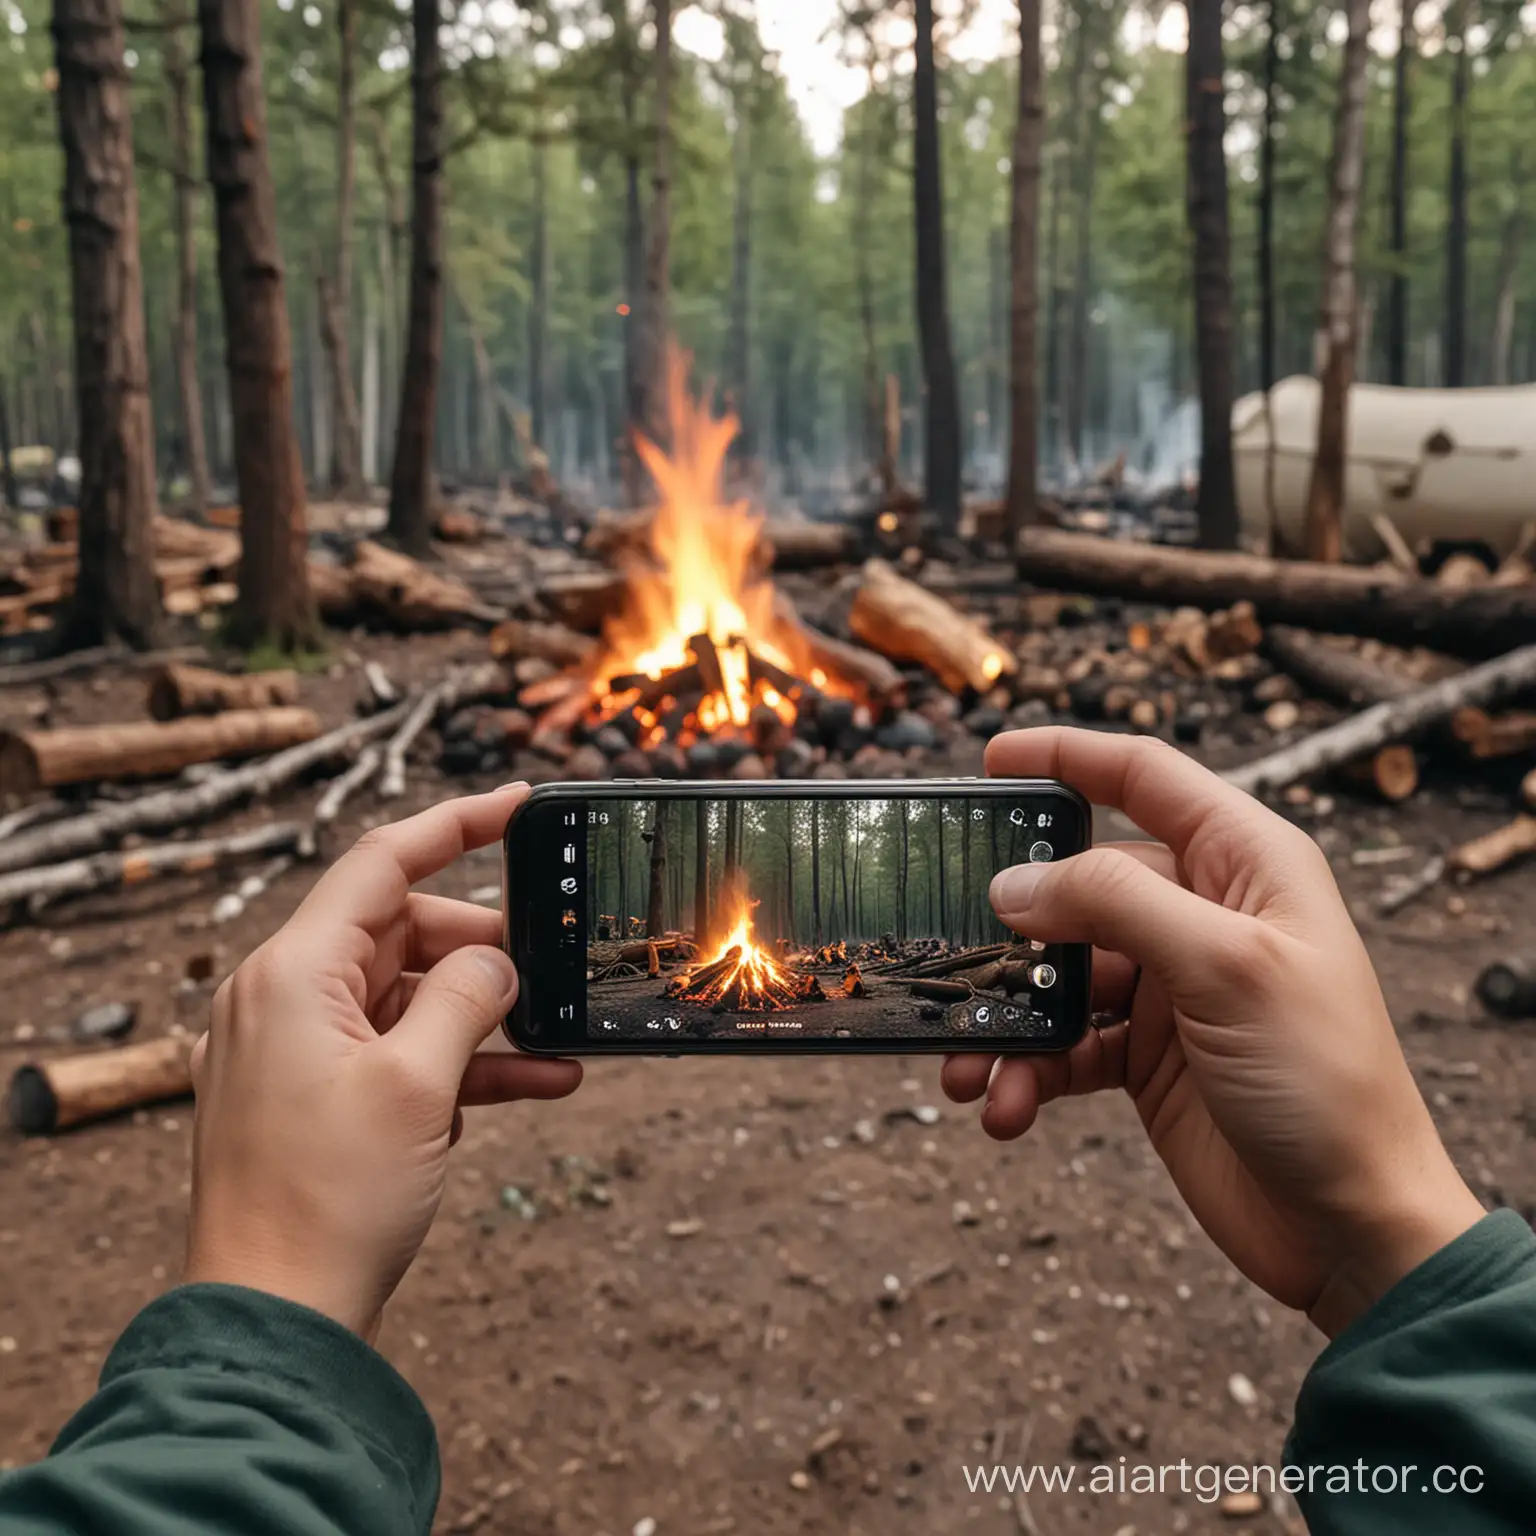 Exploring-Nature-Checking-Memories-on-Phone-by-Campfire